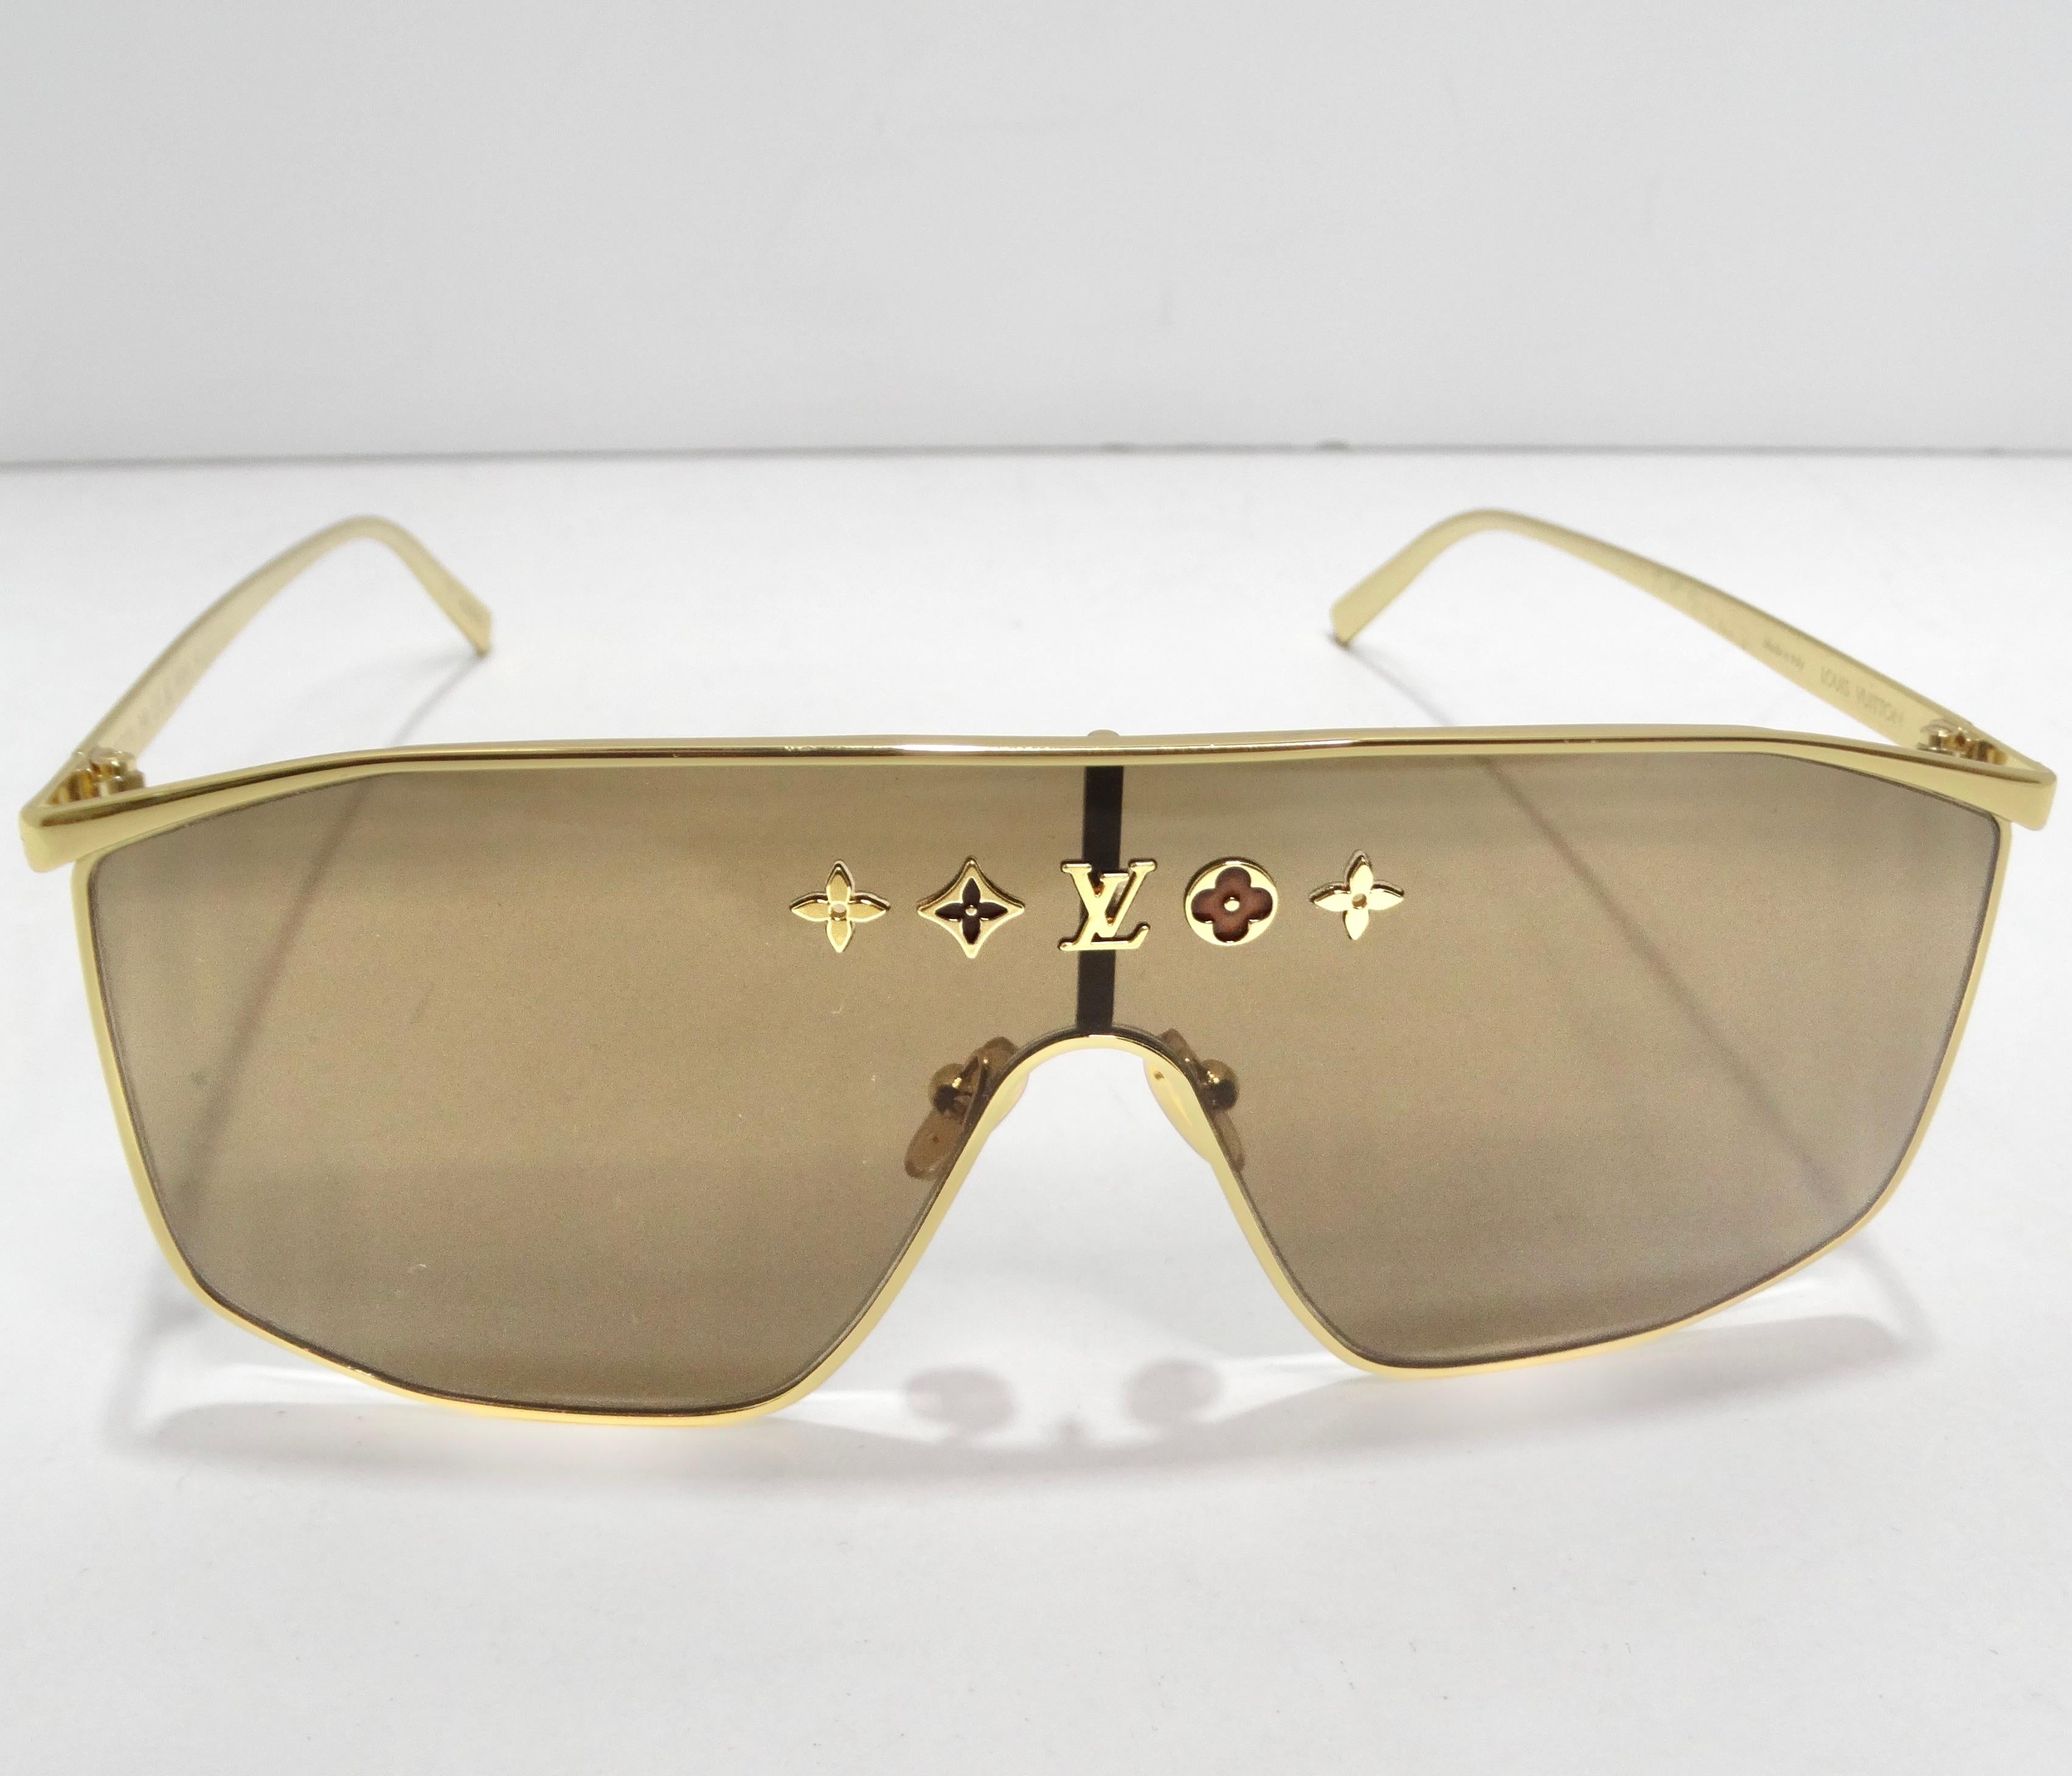 Introducing the Louis Vuitton Metal LV Golden Mask Sunglasses—an epitome of understated elegance and standout style. These sunglasses aren't just eye protection; they are a fashion statement that exudes luxury and sophistication. Picture yourself in